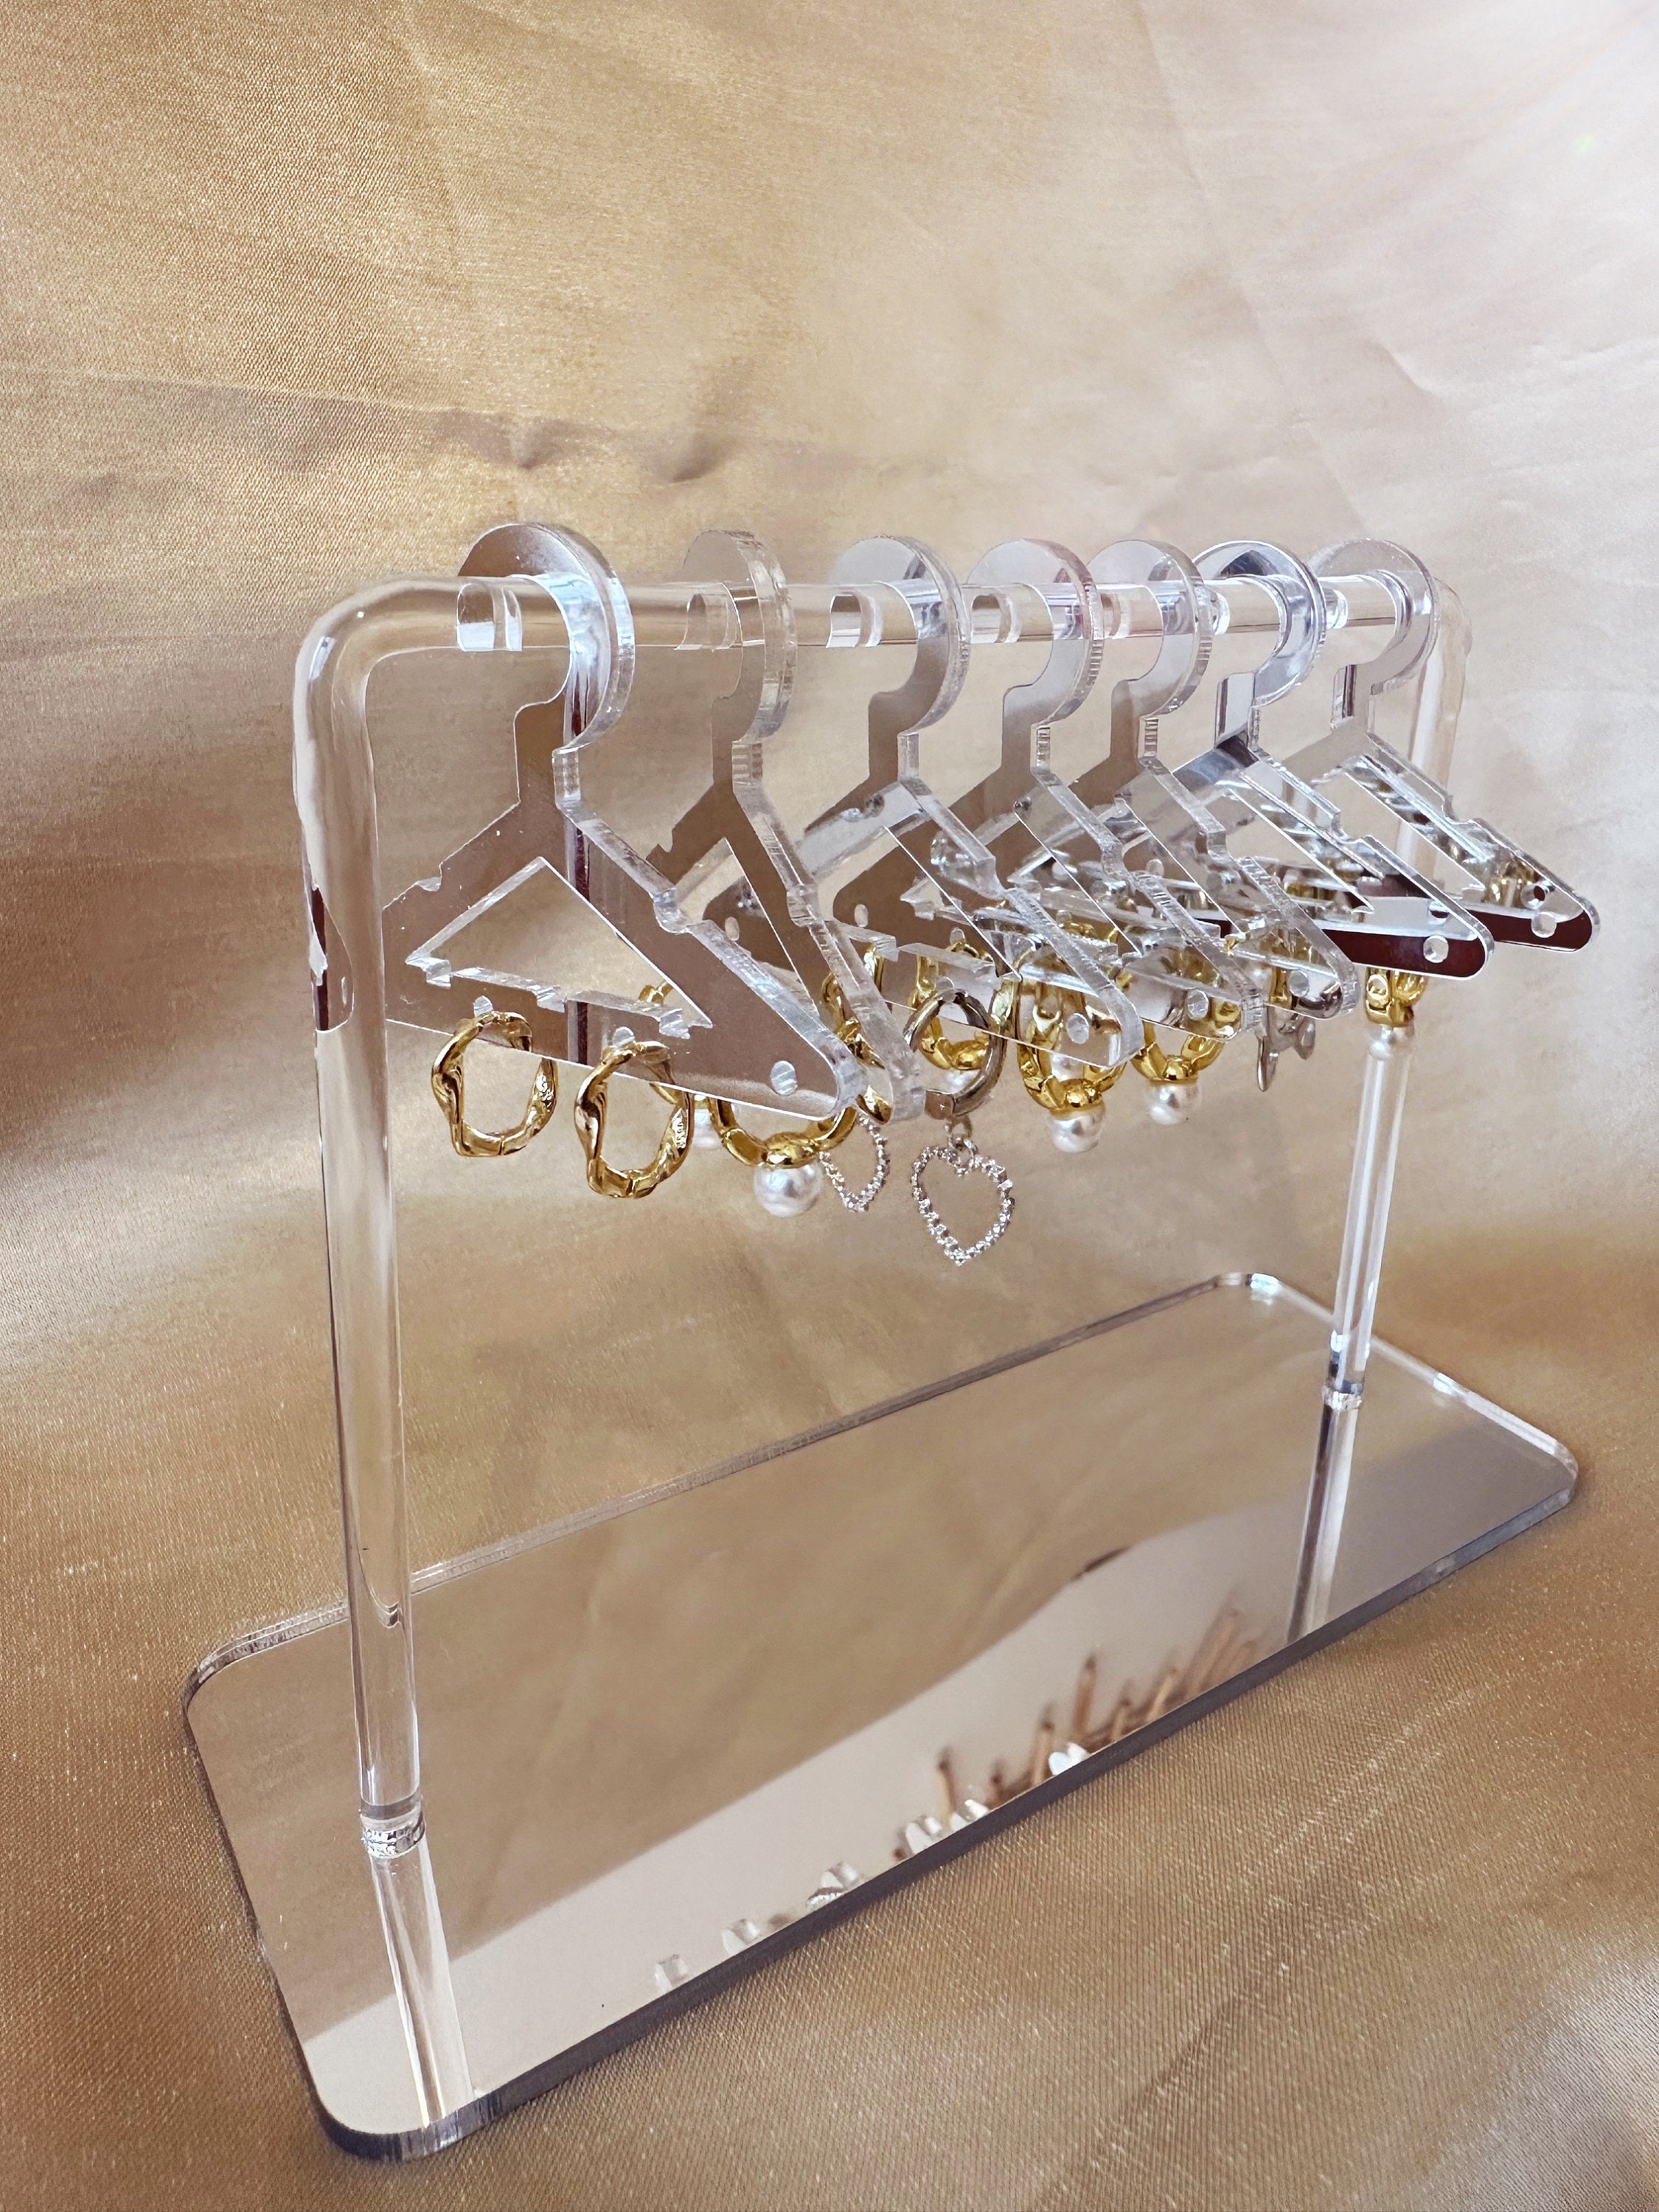 Earring Stand With Hangers, Jewelry Display, Jewelry, Room Decor, Jewelry  Decor, Jewelry Box, Doll Hangers, Miniature Hangers, 